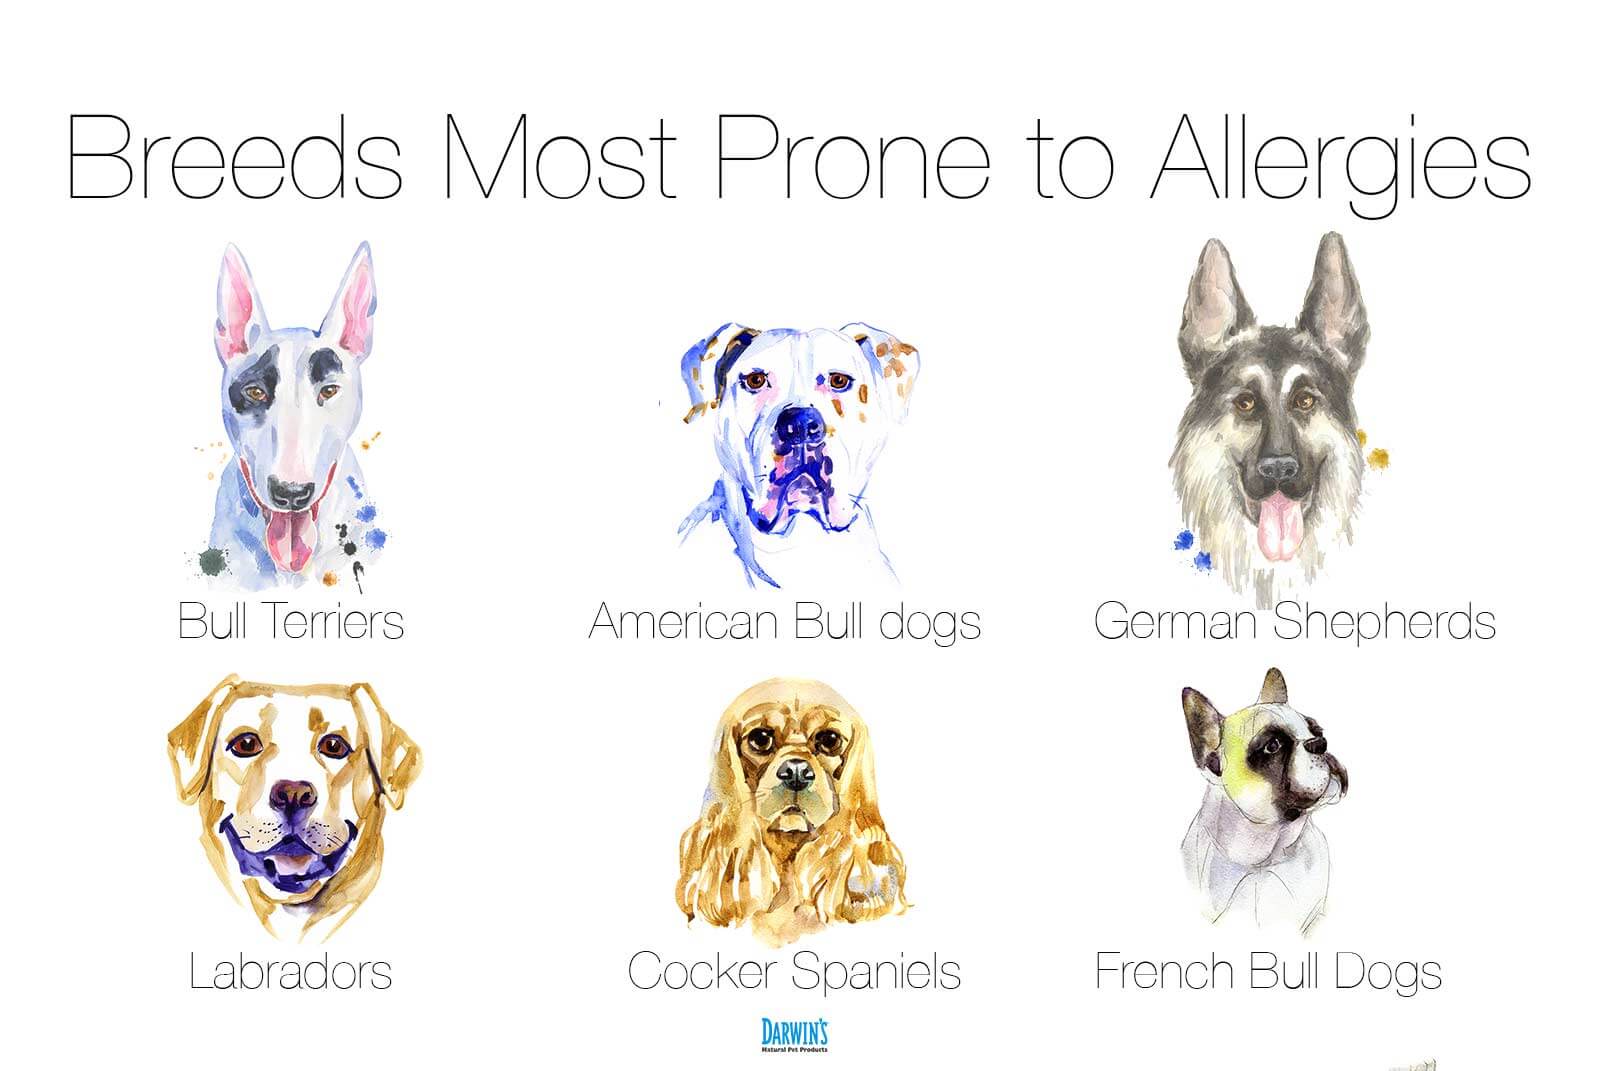 Dogs prone to Allergies